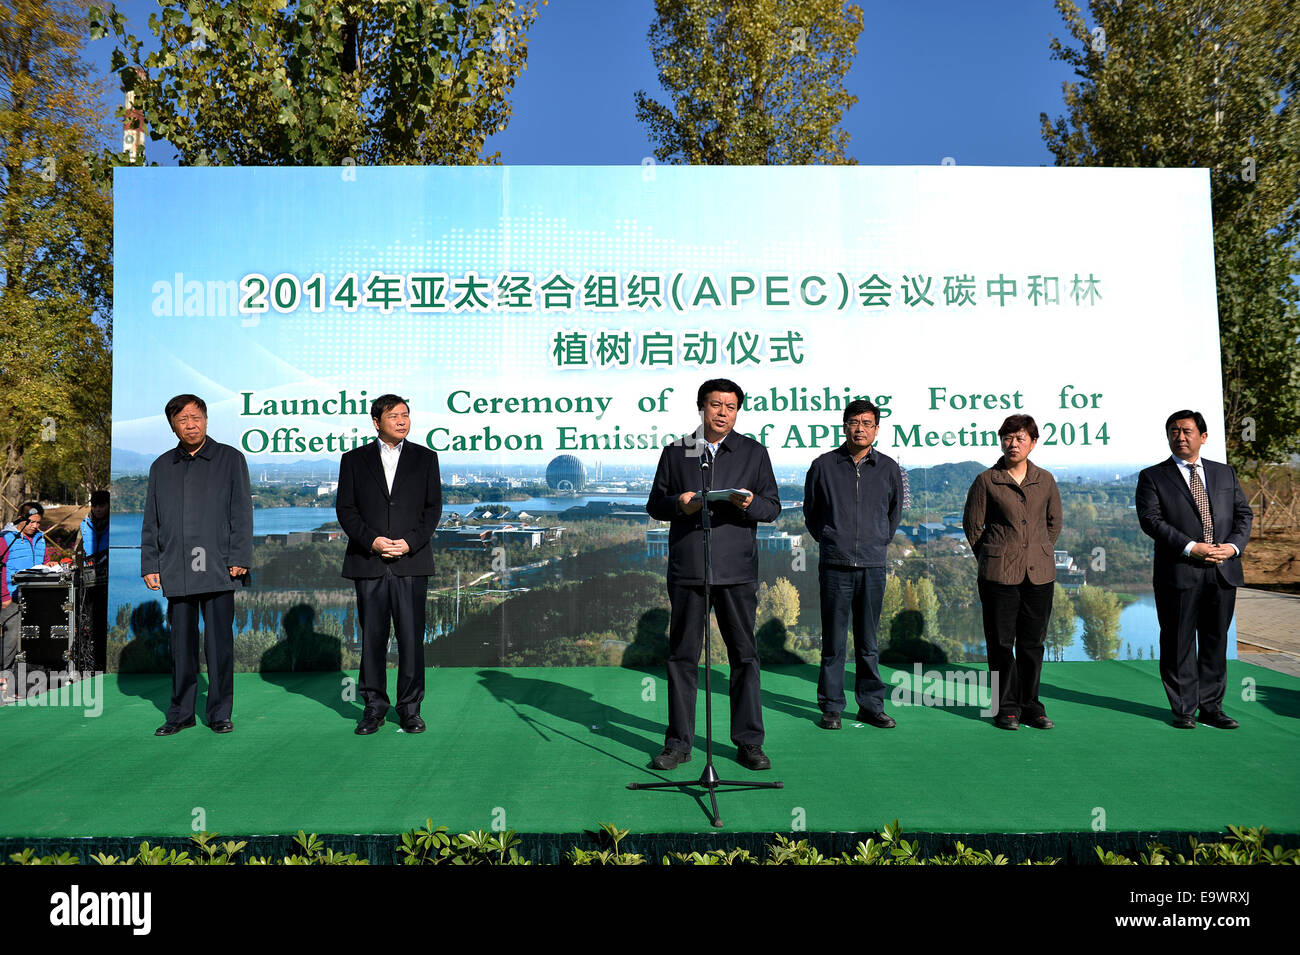 Beijing, China. 3rd Nov, 2014. The launching ceremony of establishing forest for offsetting carbon emission of APEC meeting is held in Beijing, China, Nov. 3, 2014. The forest will cover an area of 1,274 mu (85 hectares), according to the event organizer. © Li Xin/Xinhua/Alamy Live News Stock Photo